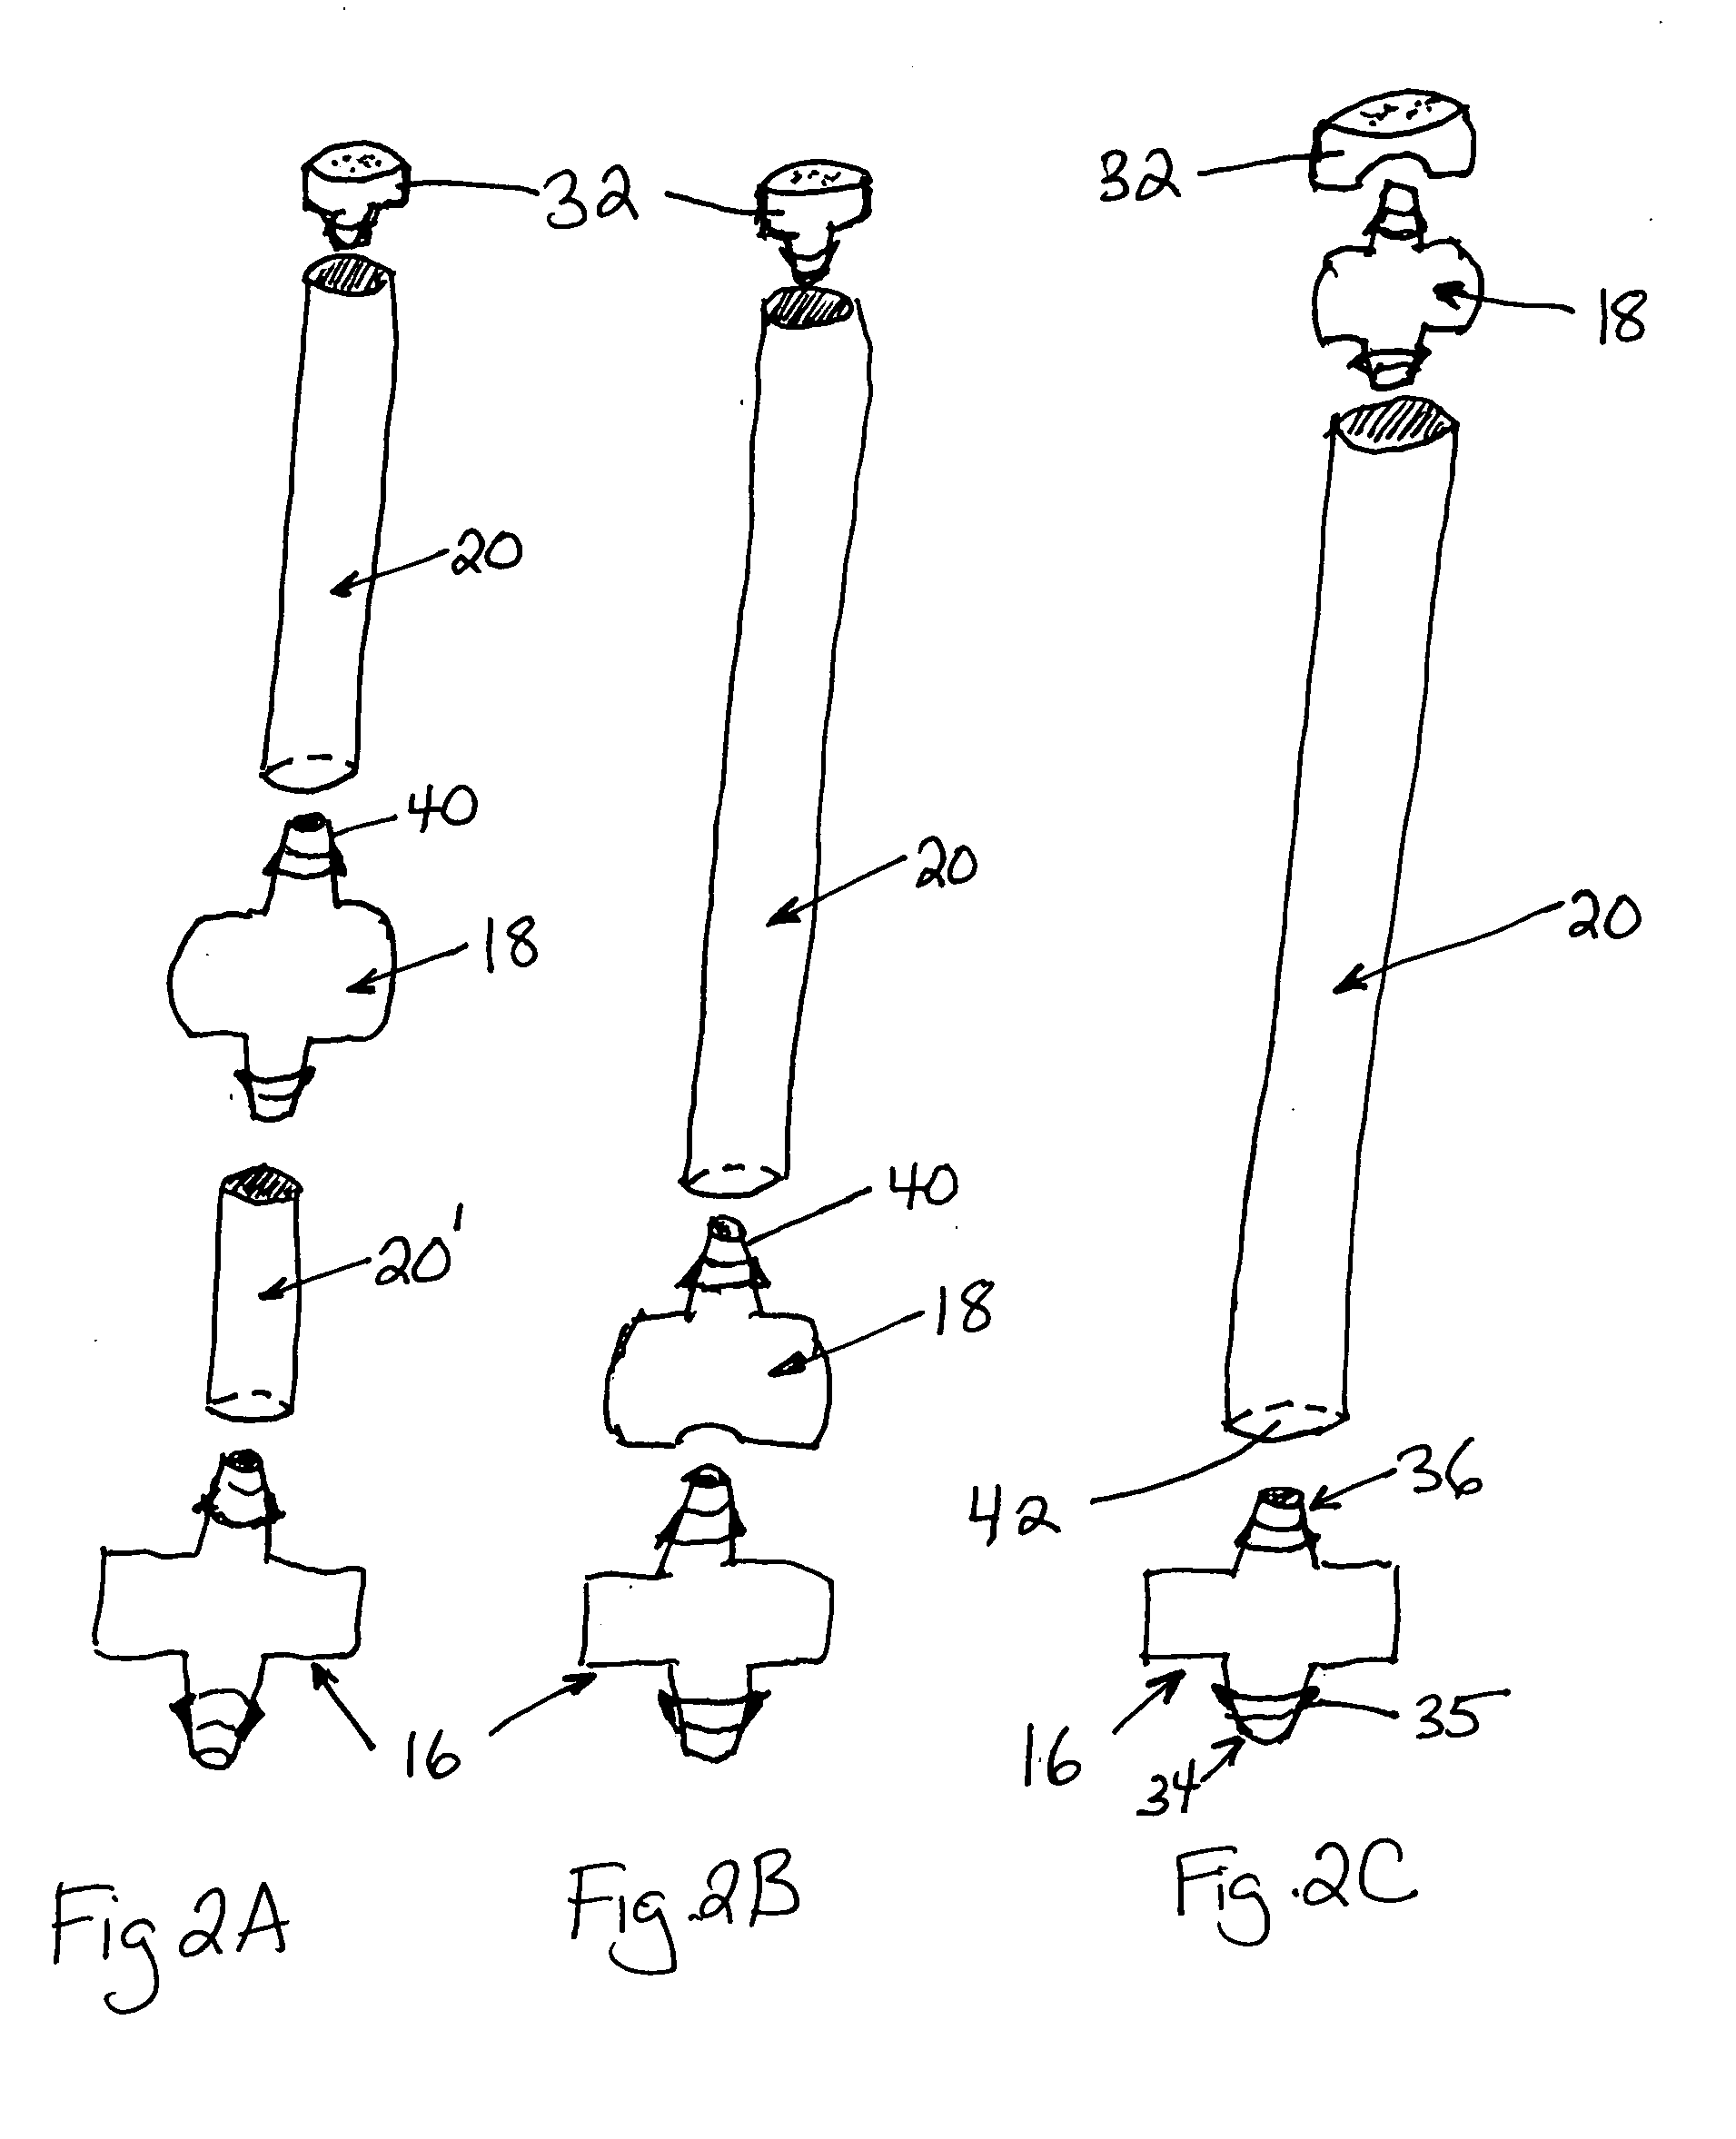 Water-conserving surface irrigation systems and methods